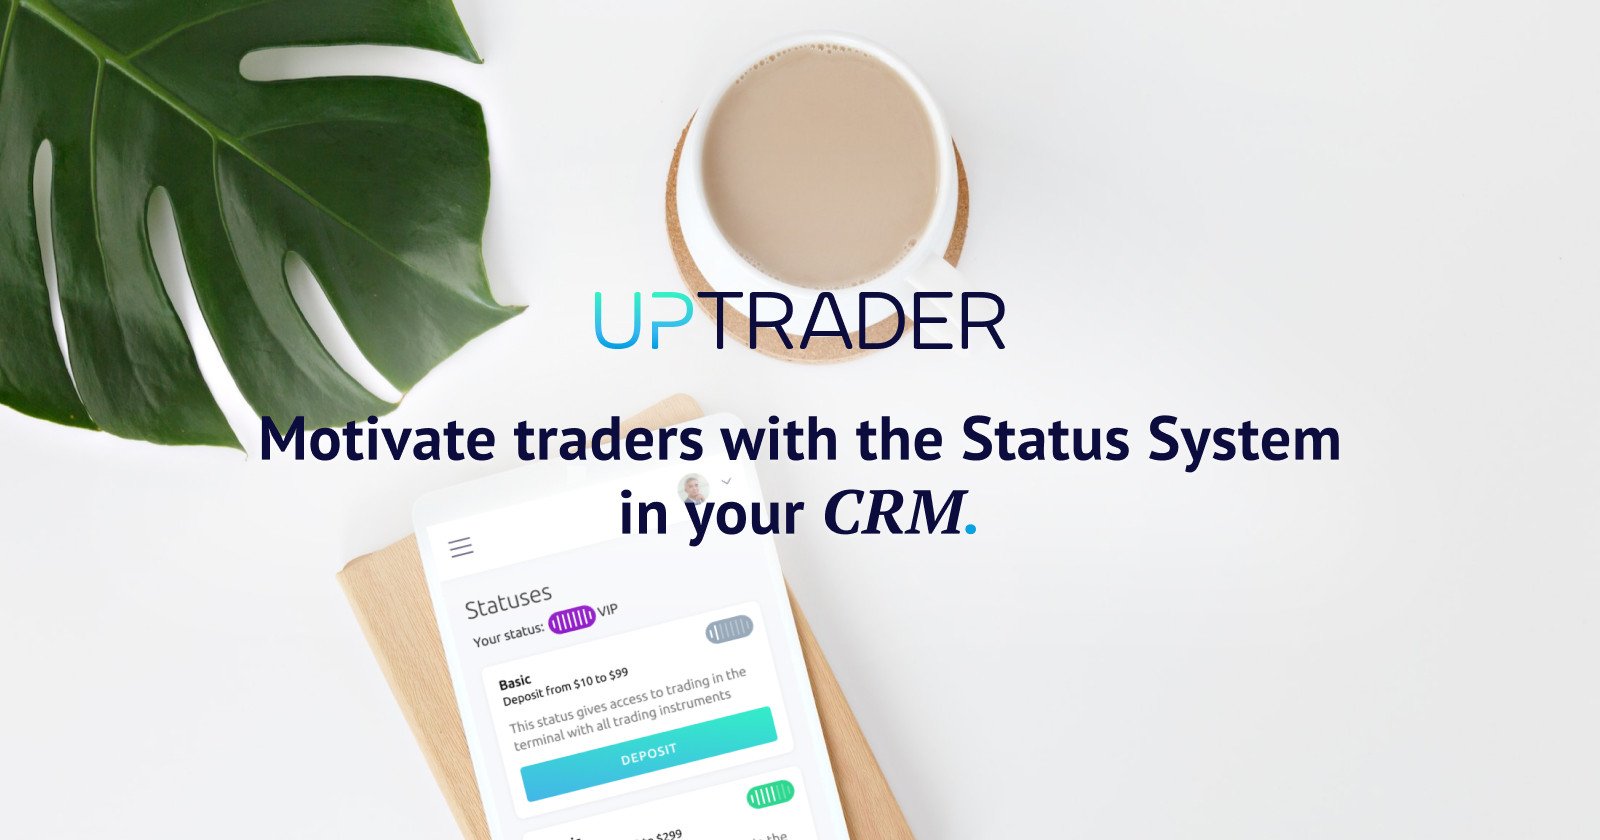 Motivate traders with the Status System in your CRM